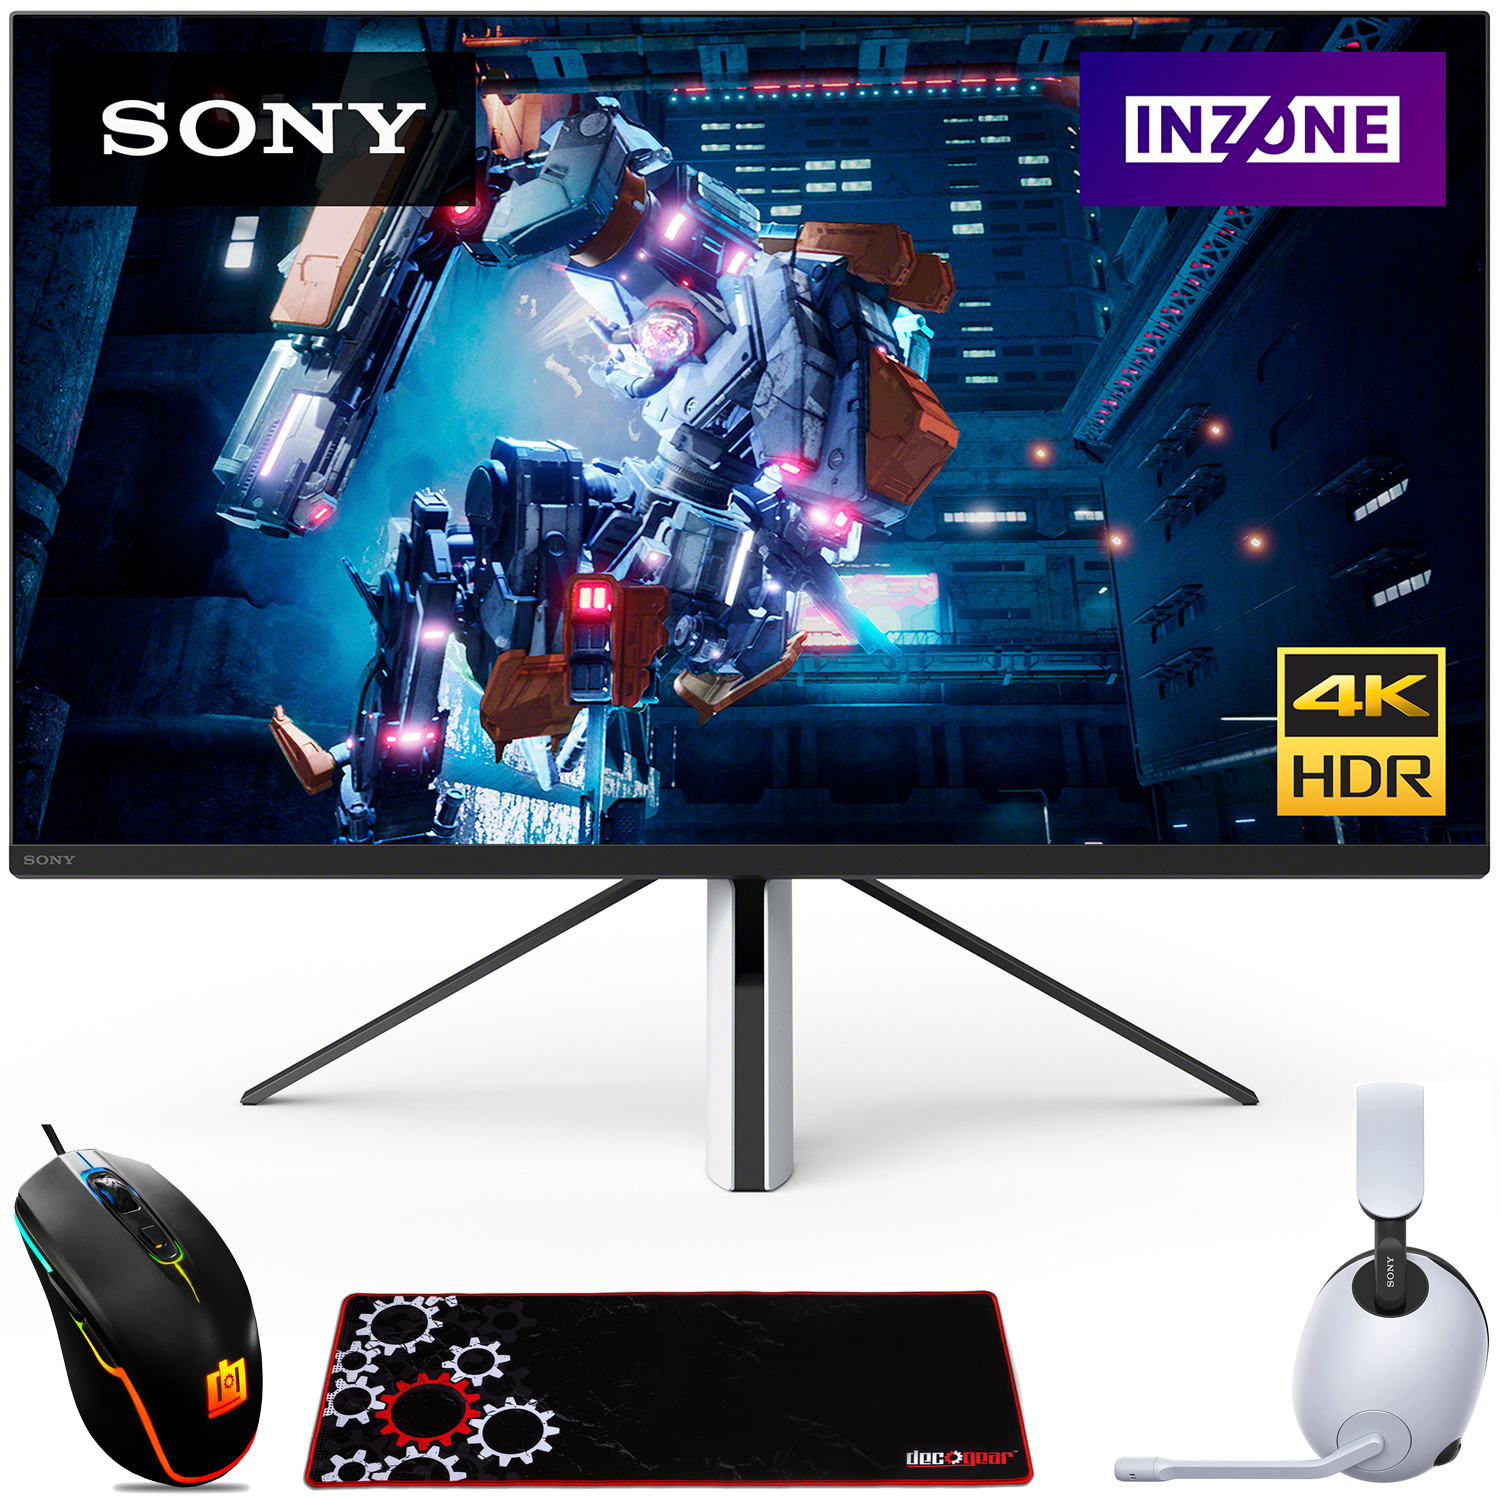 Photos - Mobile Phone Headset Sony 27 INZONE M9 Gaming Monitor + INZONE H9 Noise Cancelling Headset, Acc 